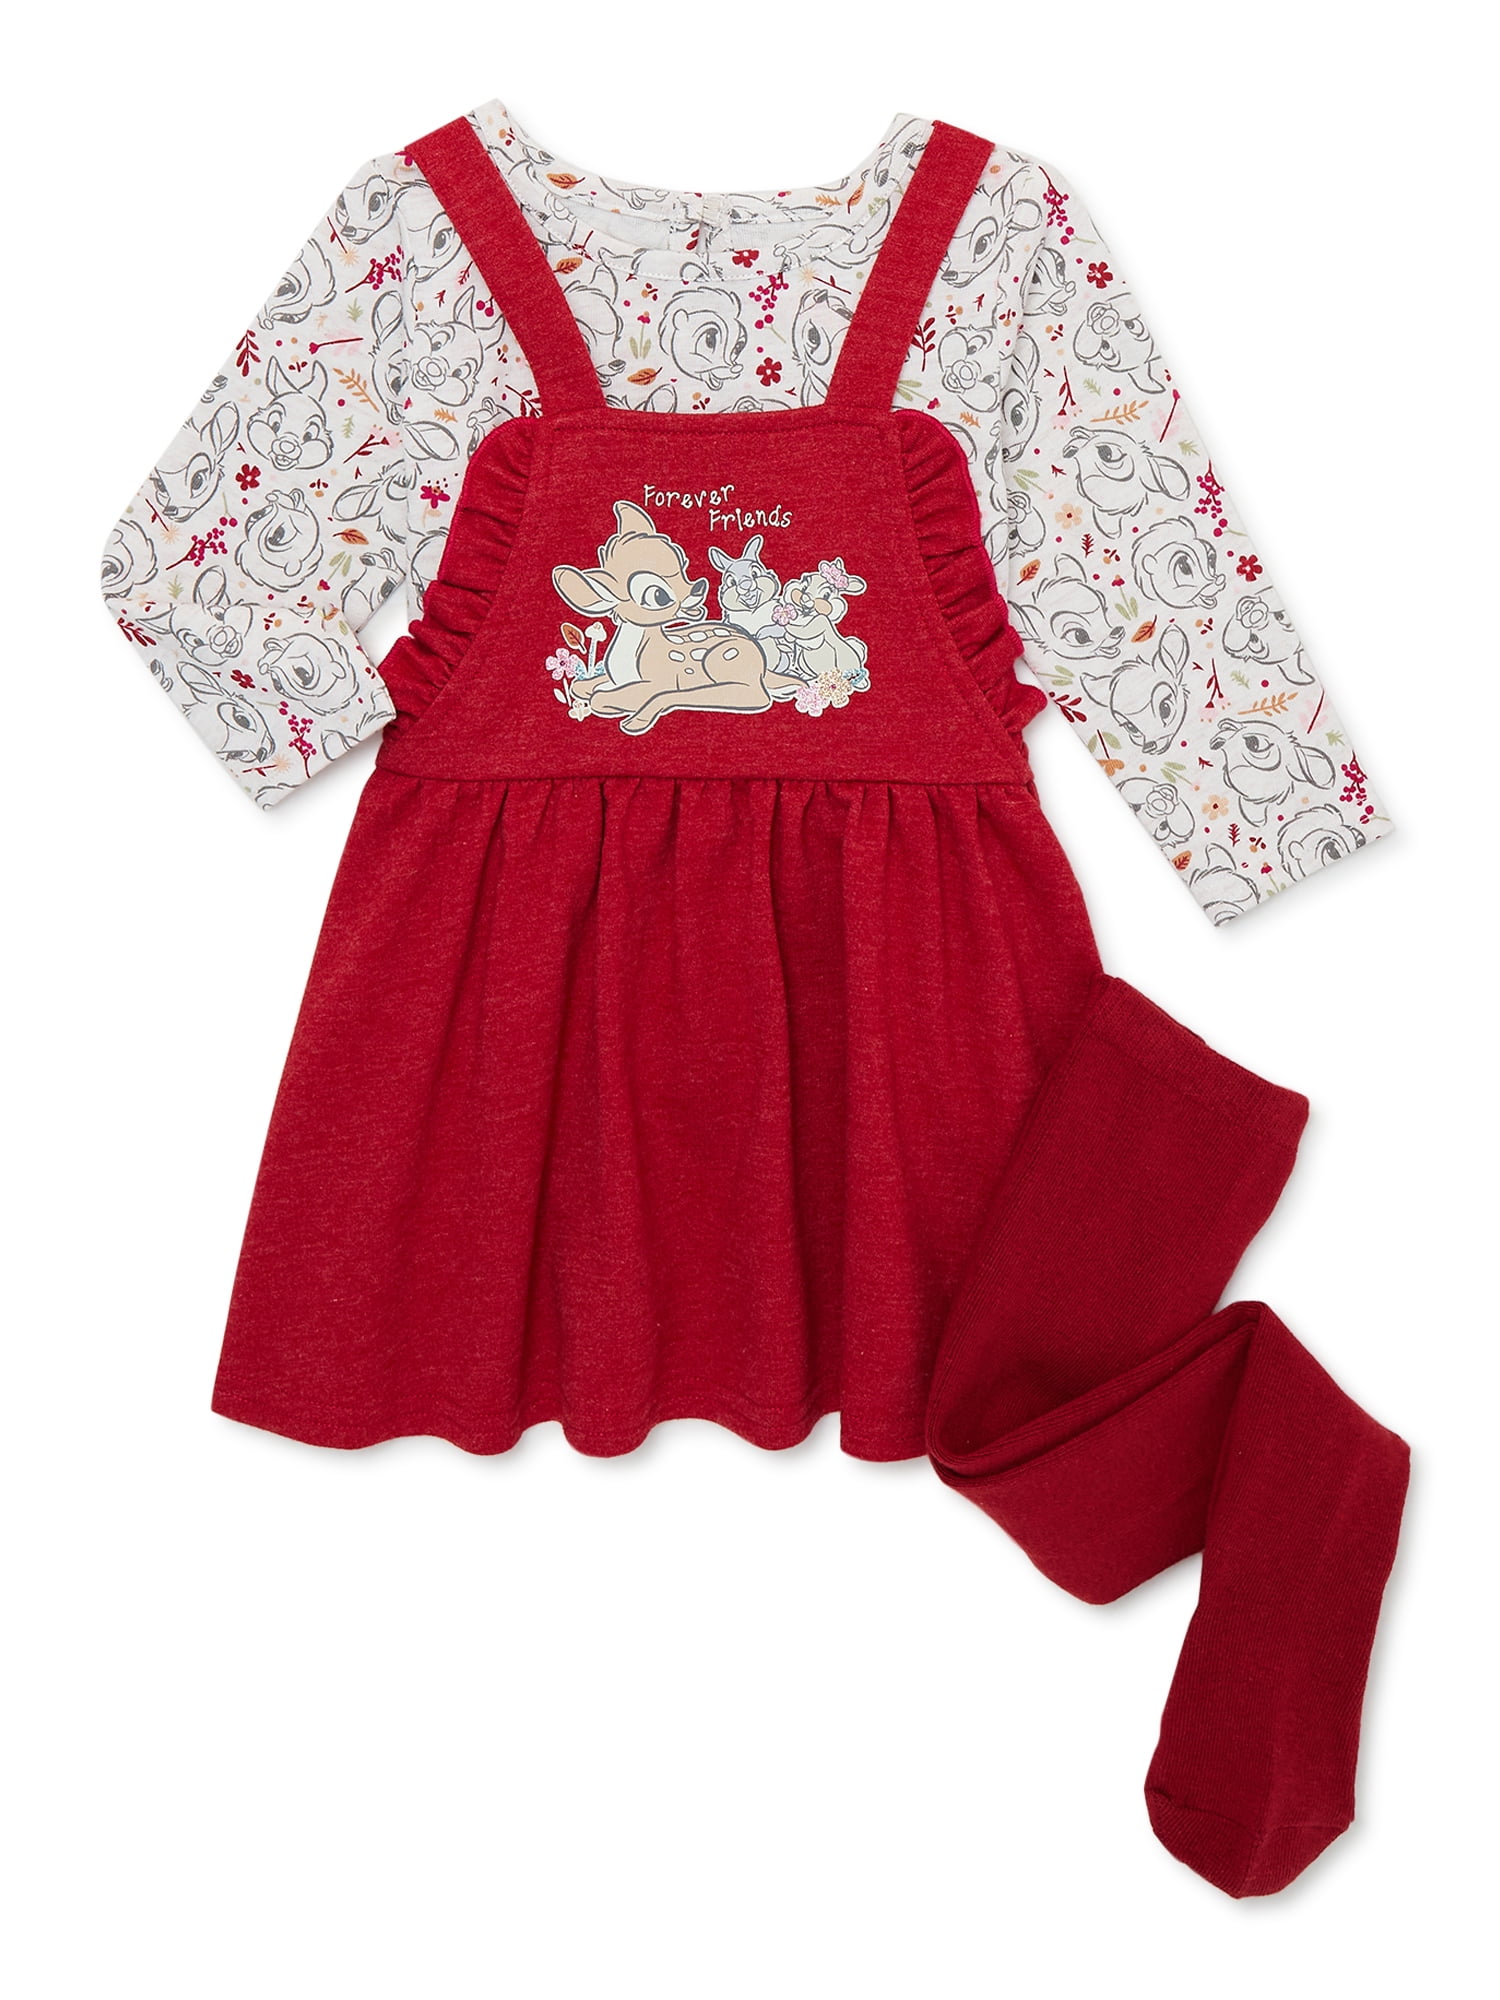 Disney Bambi Baby Girls Pinafore Dress, Top with Long Sleeves and Tights Set, 3-Piece, Sizes 0/3-24 Months